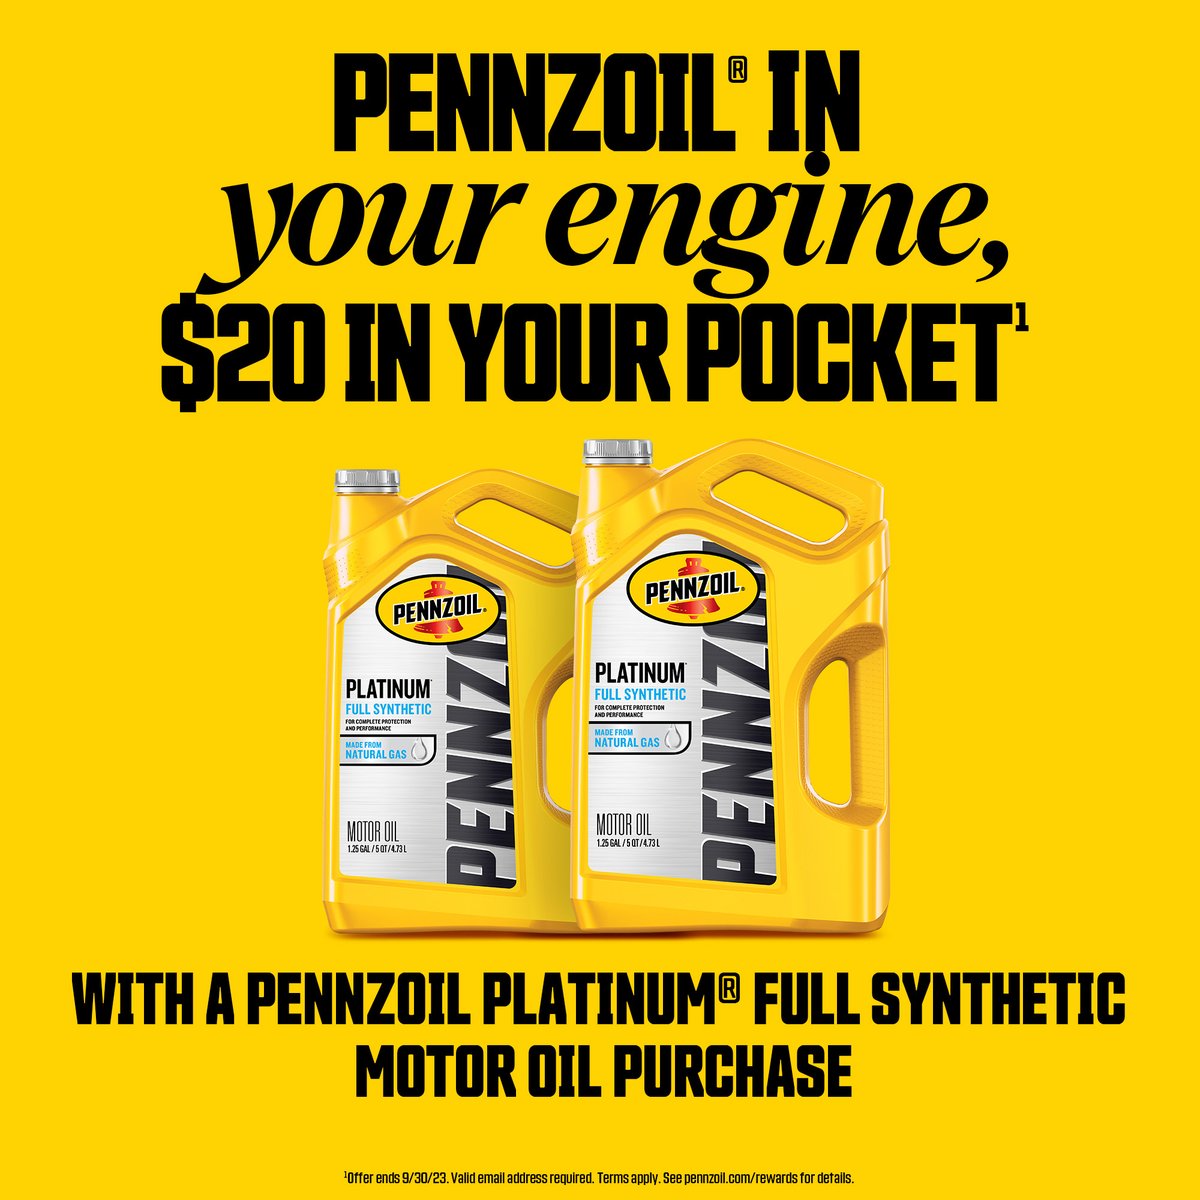 pennzoil-on-twitter-pennzoil-in-your-engine-20-in-your-pocket-when